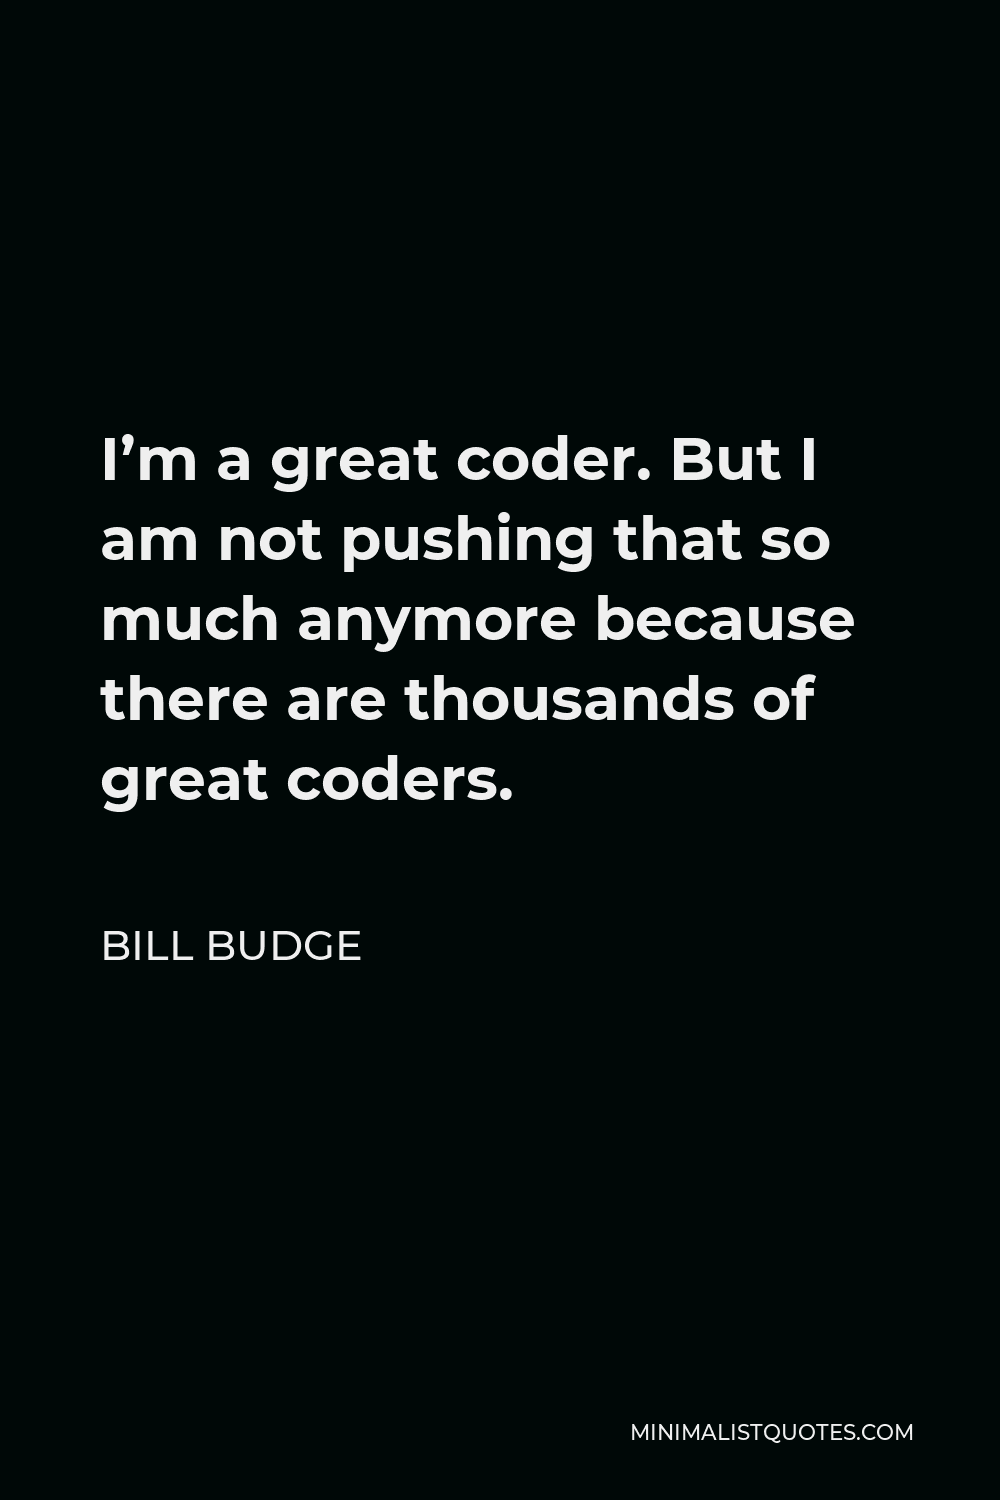 Bill Budge Quote - I’m a great coder. But I am not pushing that so much anymore because there are thousands of great coders.